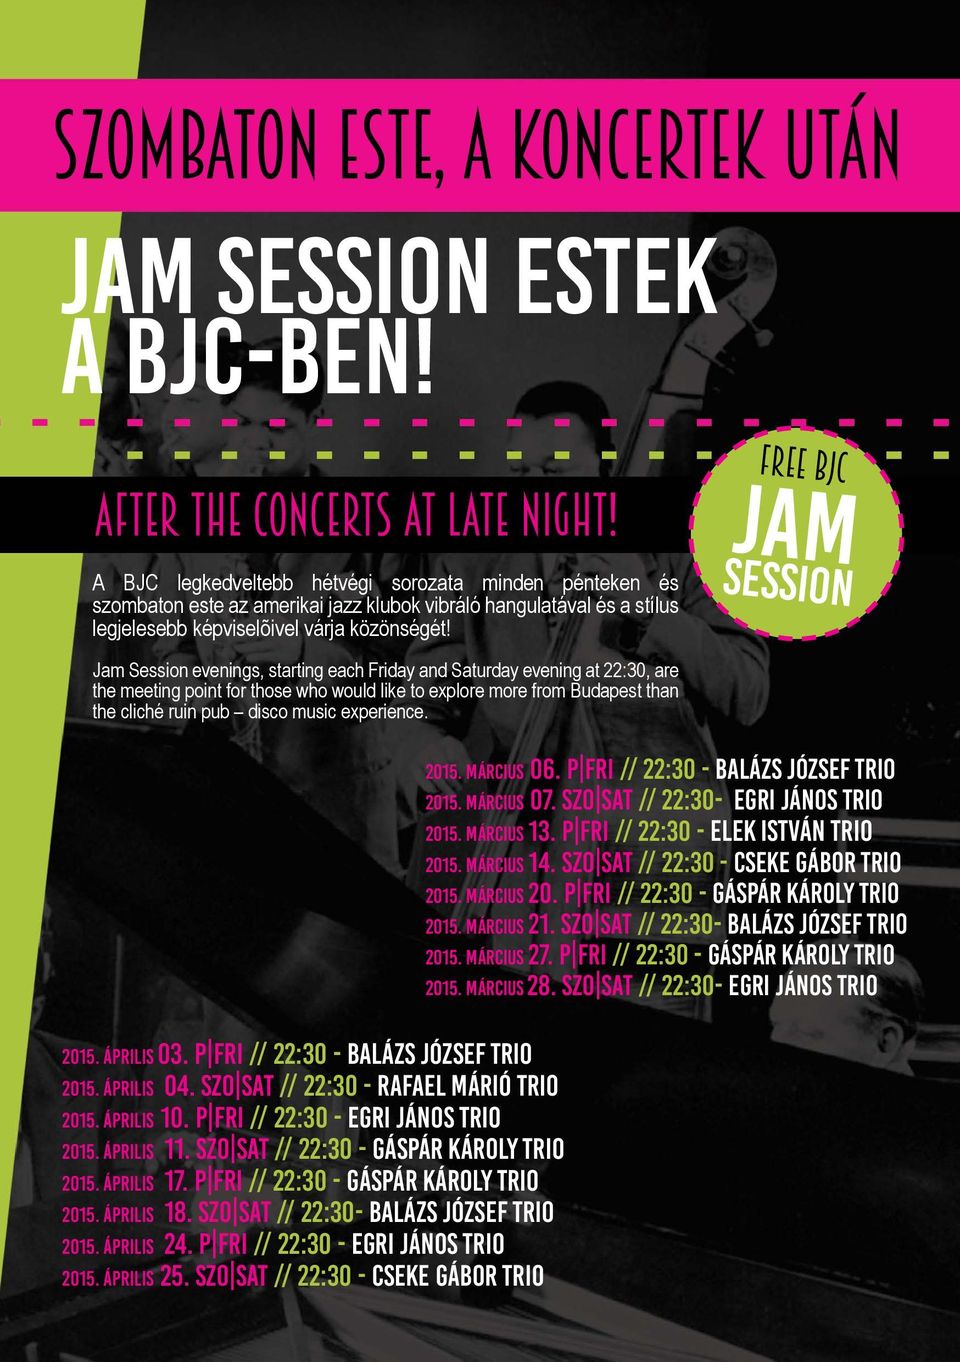 Jam Session evenings, starting each Friday and Saturday evening at, are the meeting point for those who would like to explore more from Budapest than the cliché ruin pub disco music experience.